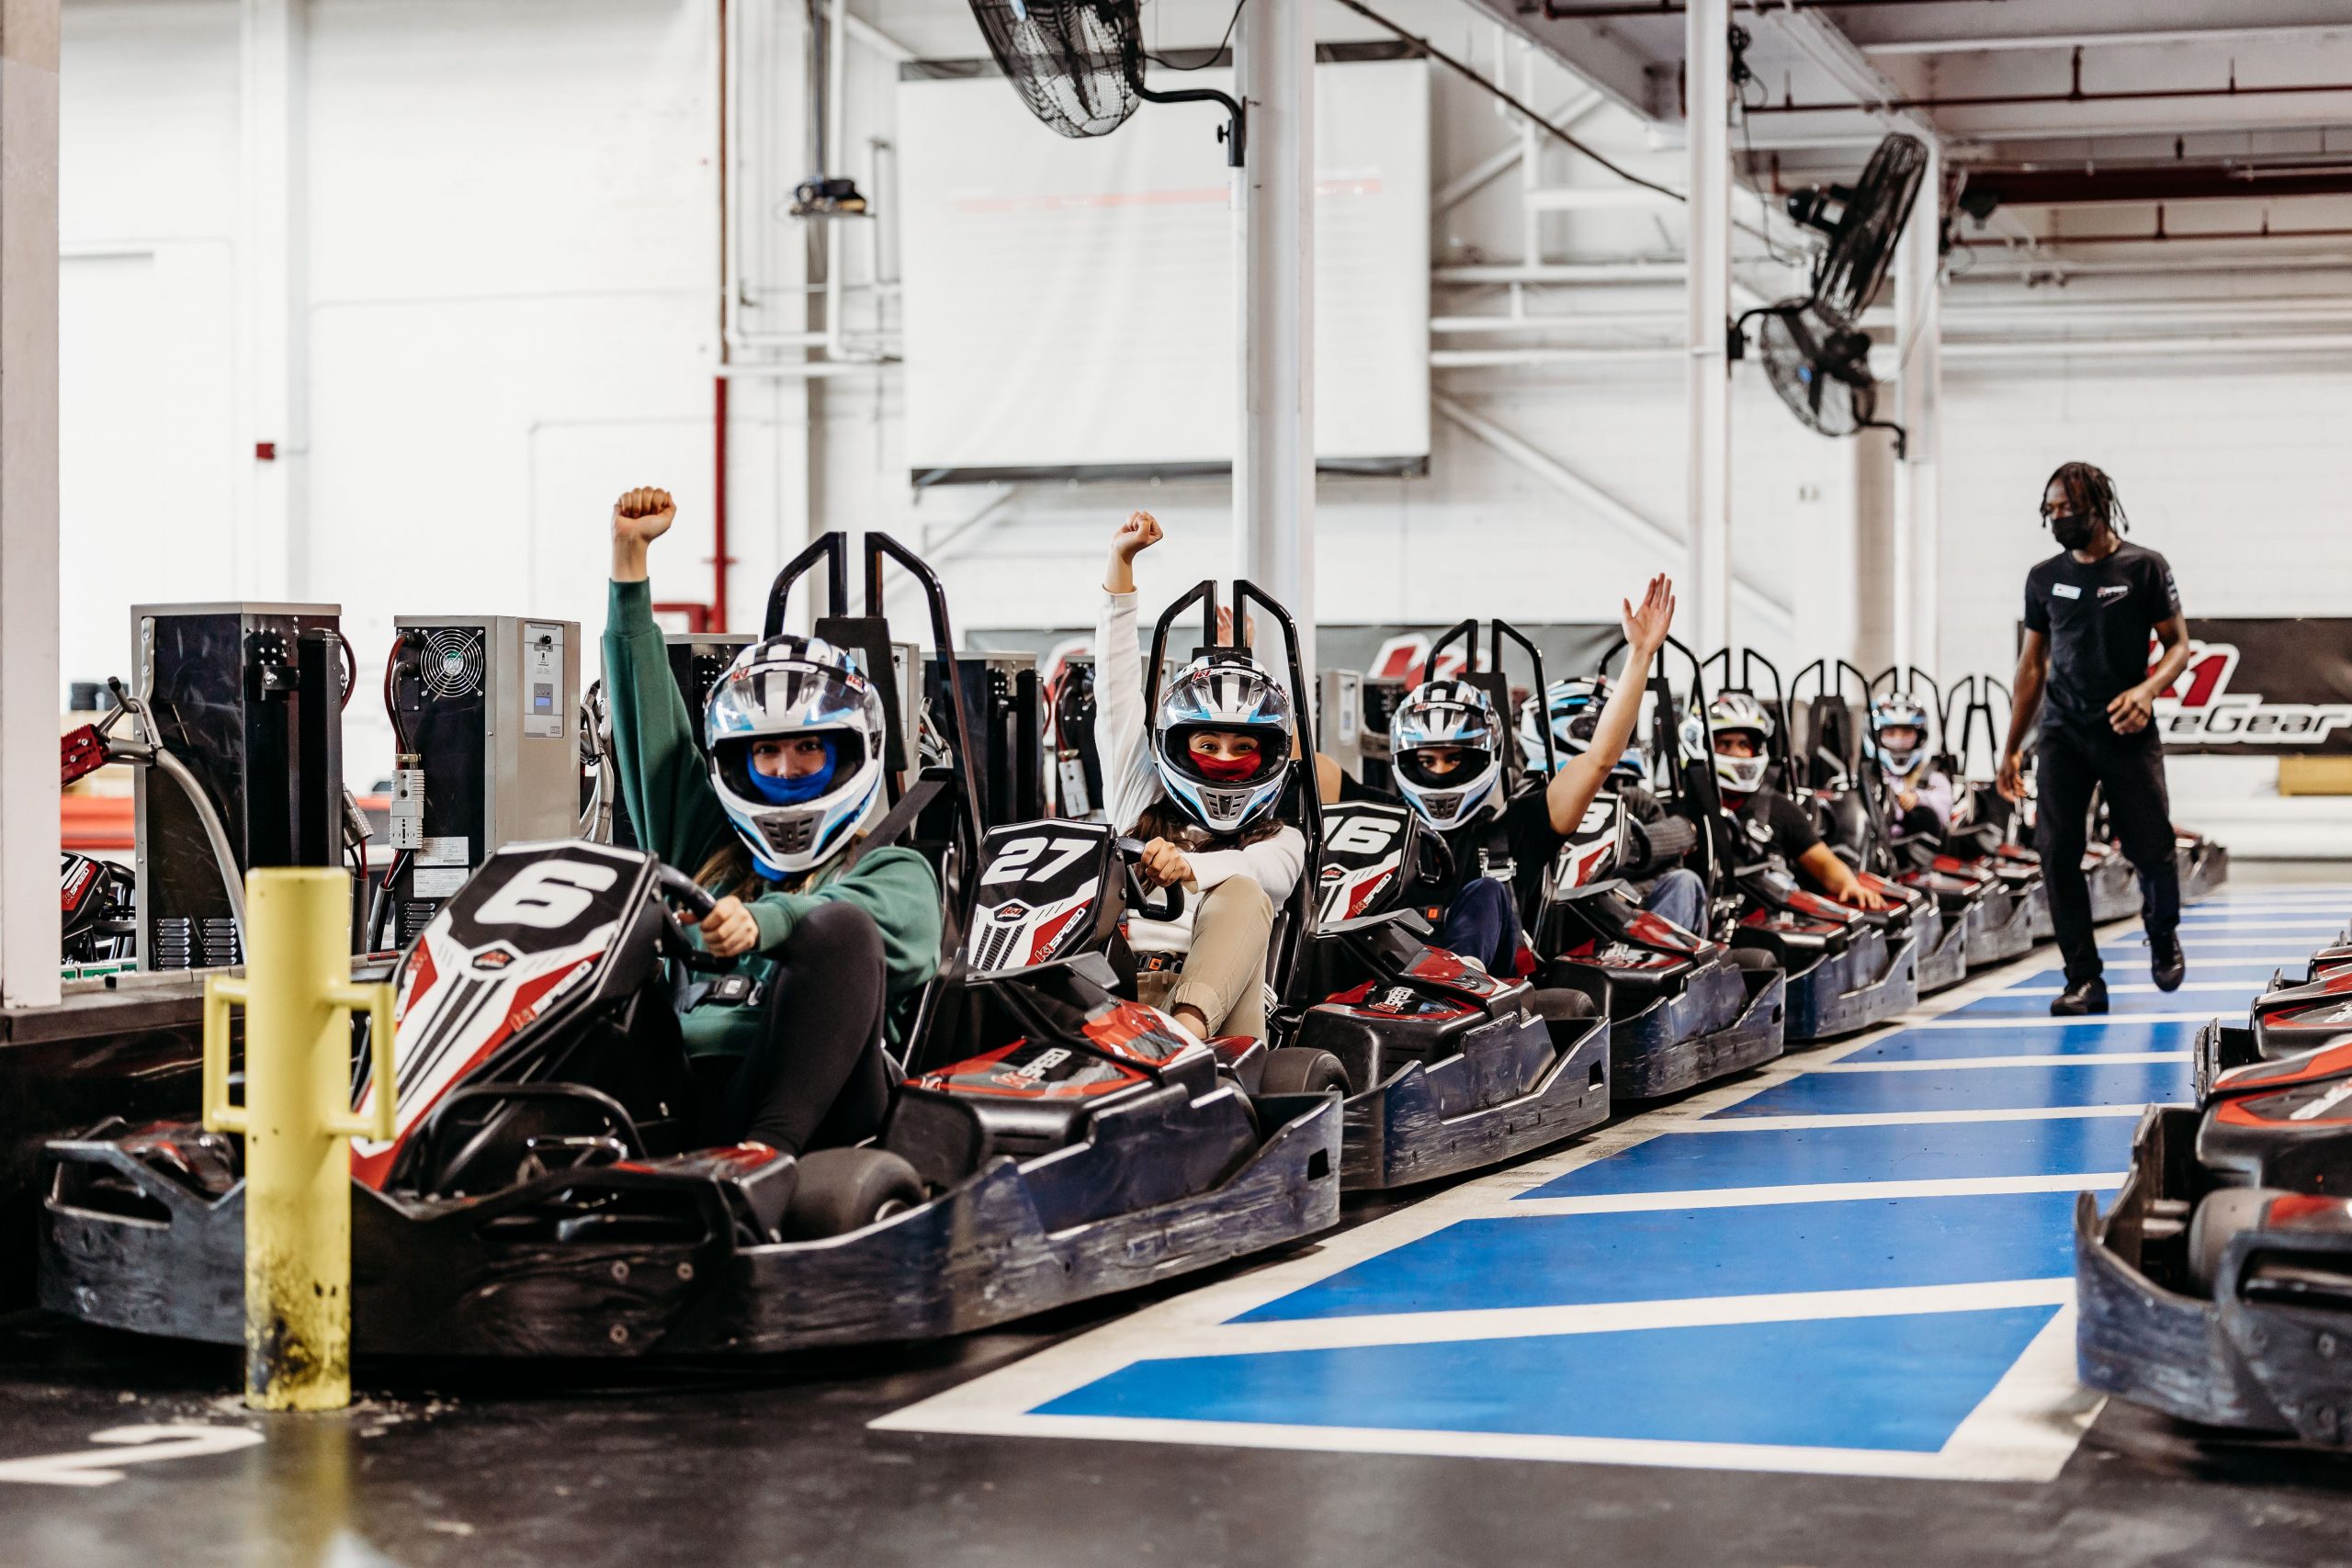 Indoor vs Outdoor Karting: What Are The Differences?